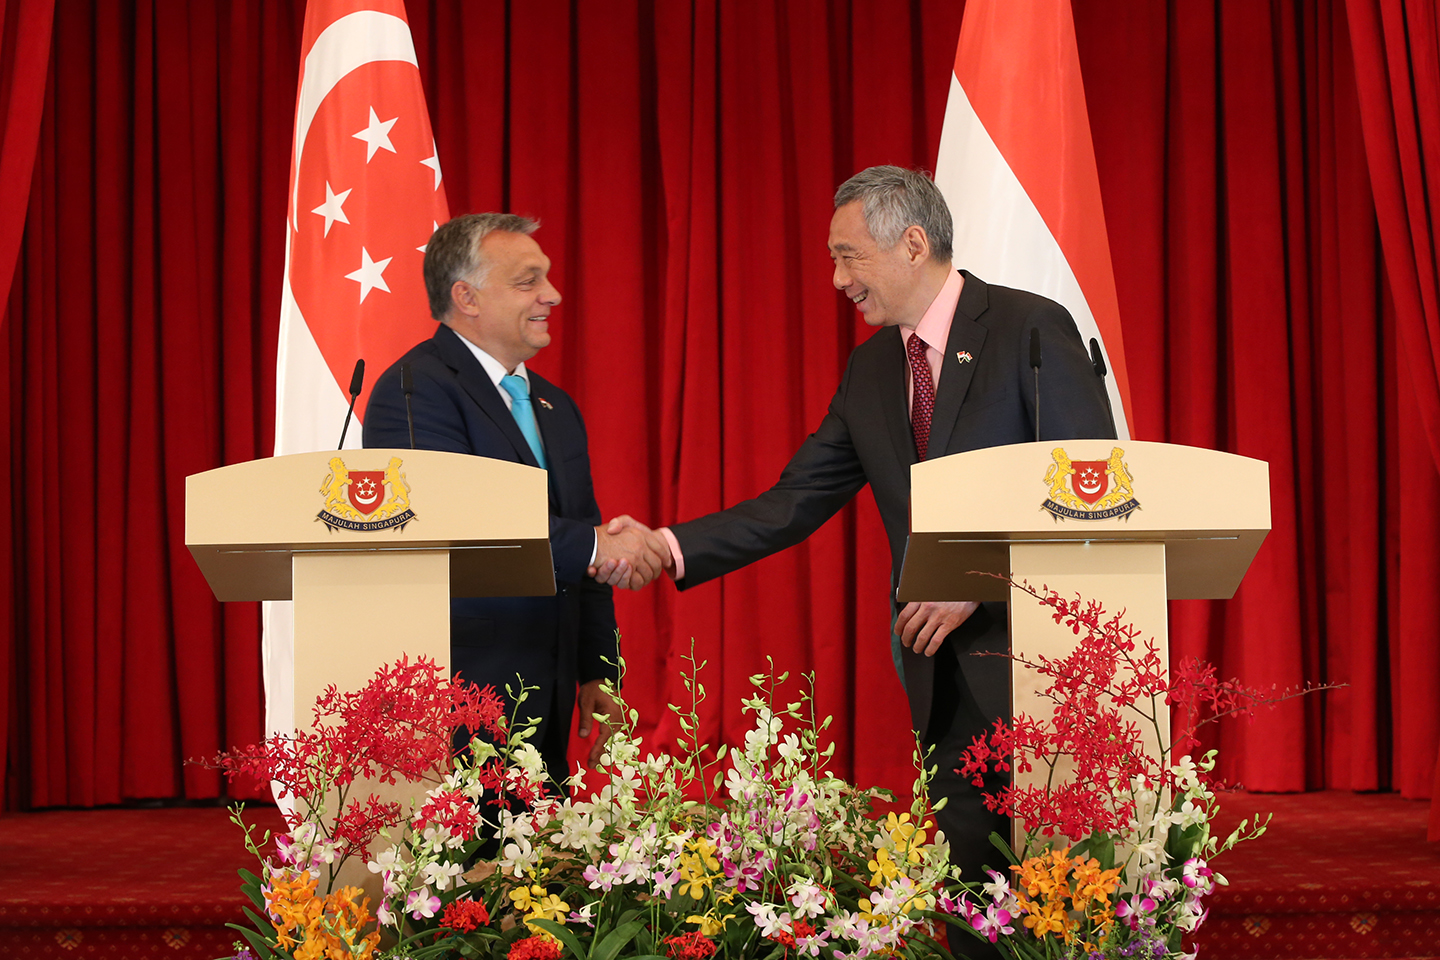 PM Lee Hsien Loong at Joint Press Conference with Hungarian PM Orban Viktor on 26 Sep 17 (MCI Photo by LH Goh)